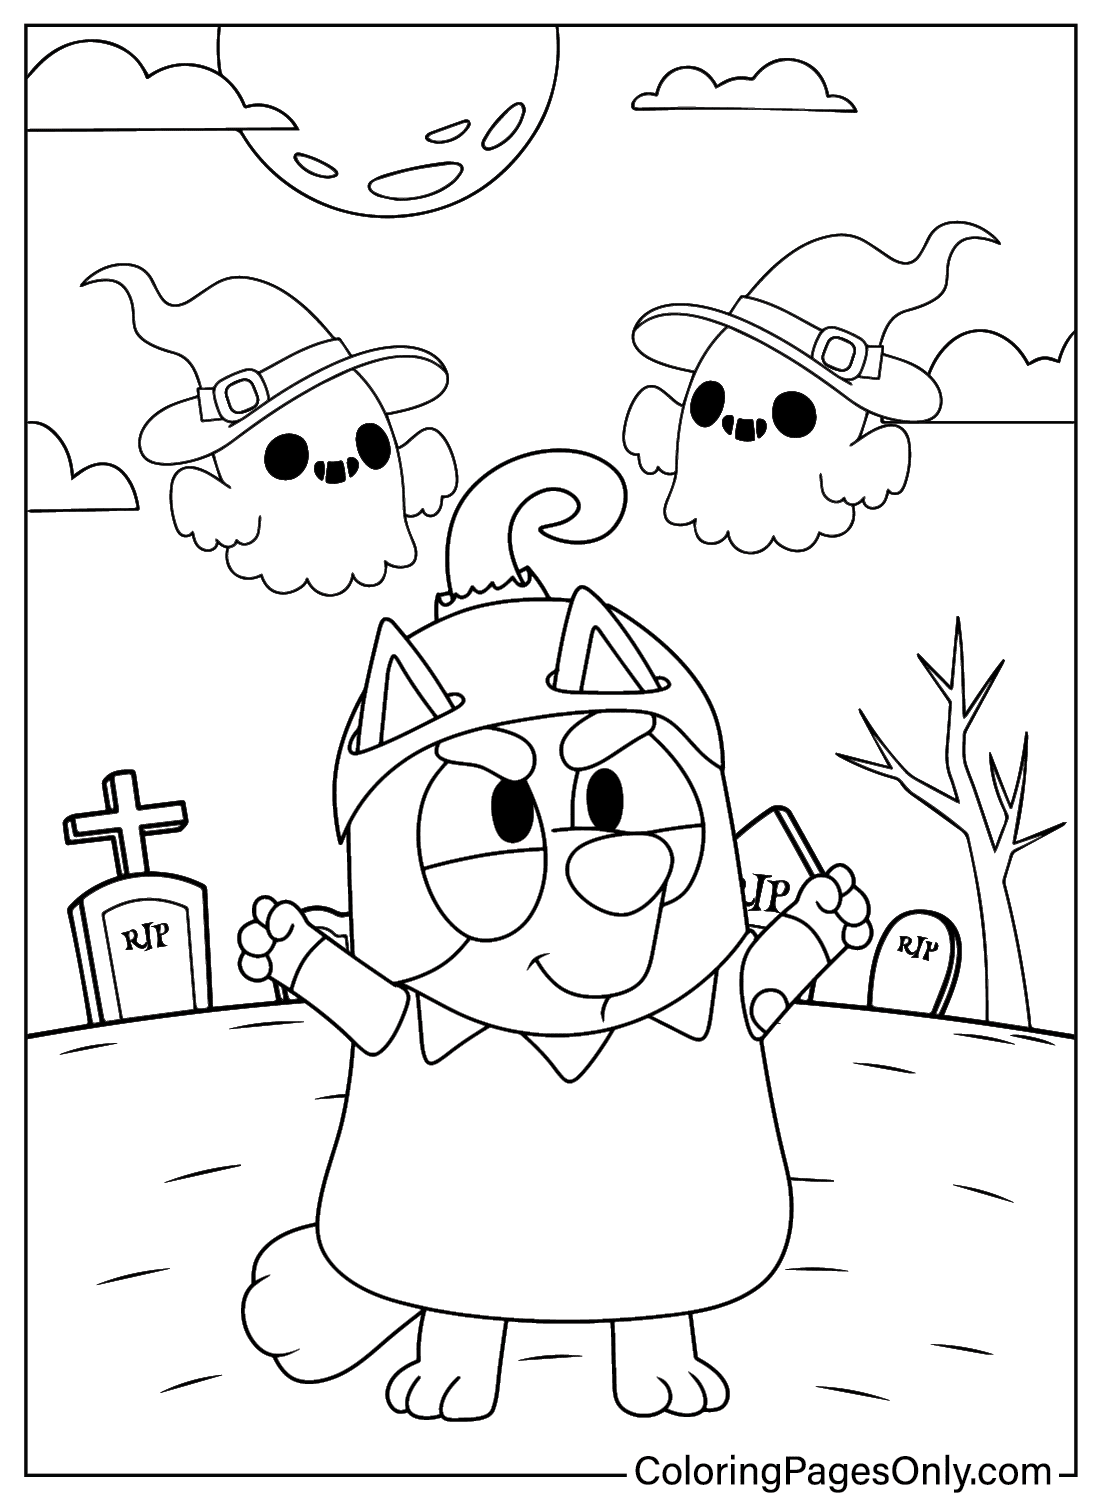 Bluey Halloween Coloring Page PDF from Bluey Halloween